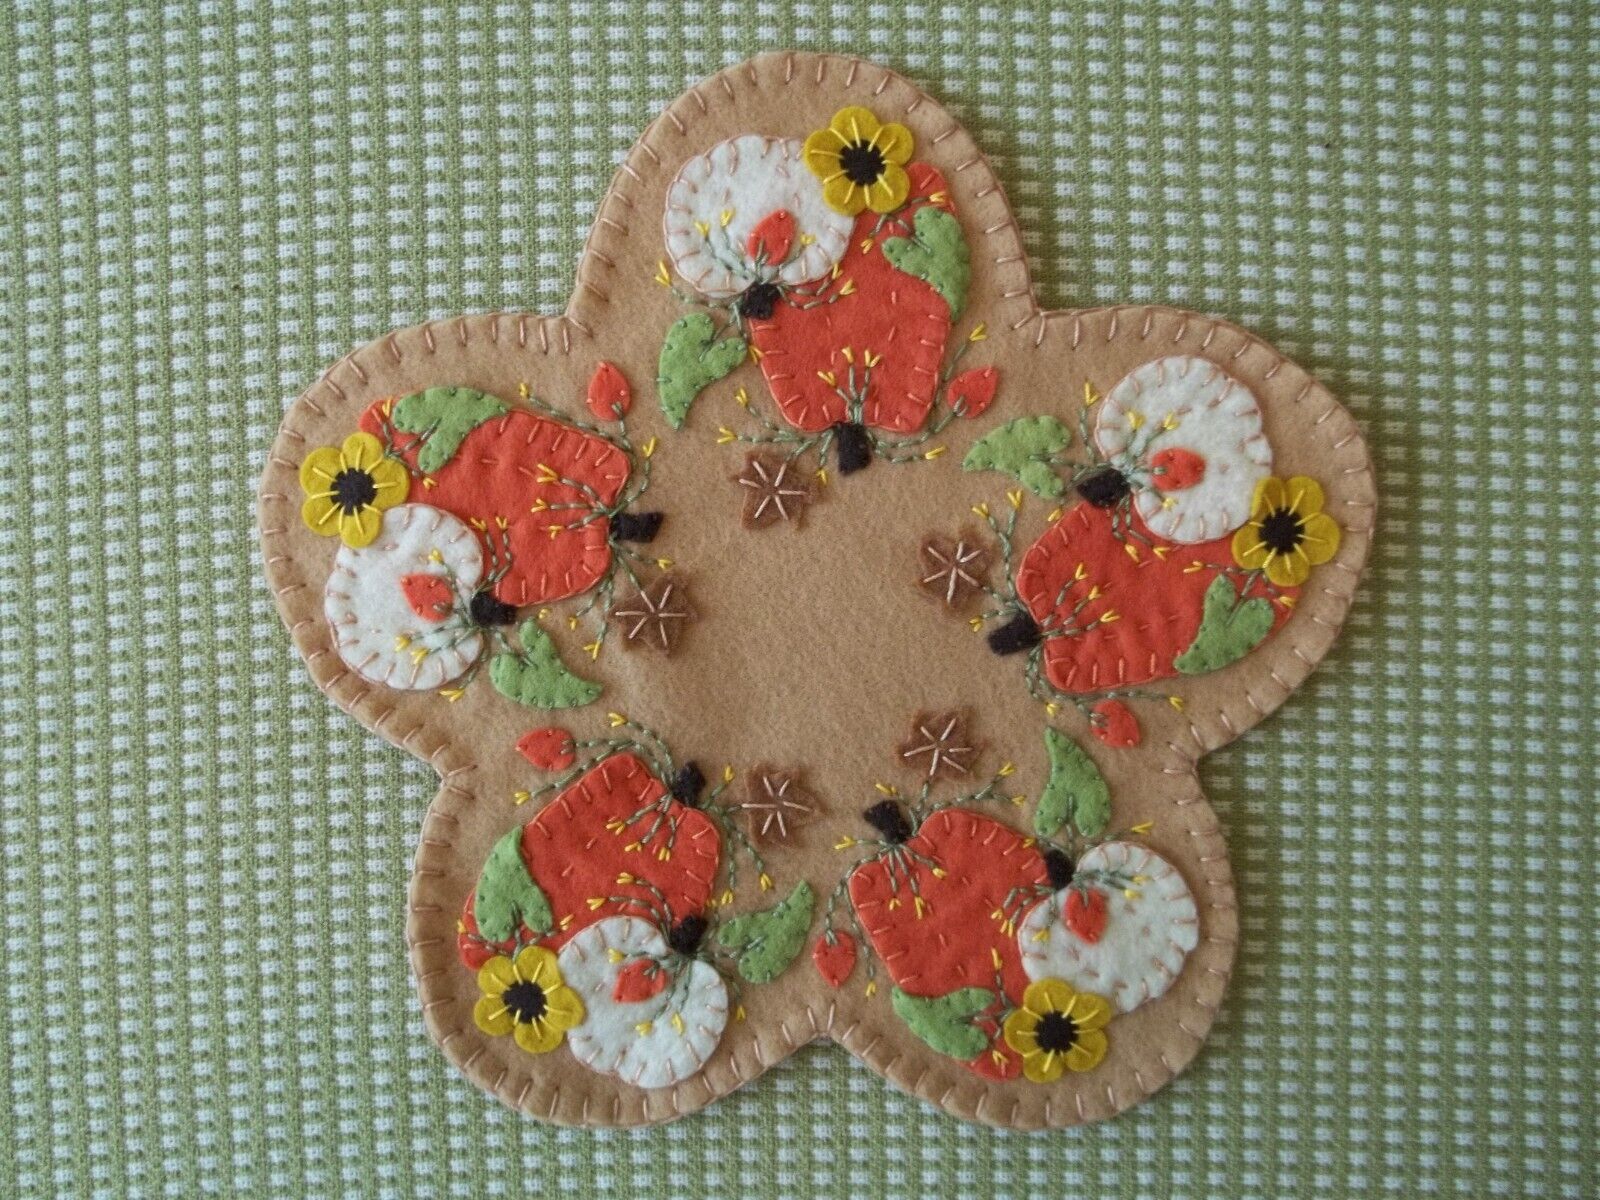 Primitive Country Sunflowers And Pumpkins Candle Mat With Free Shipping